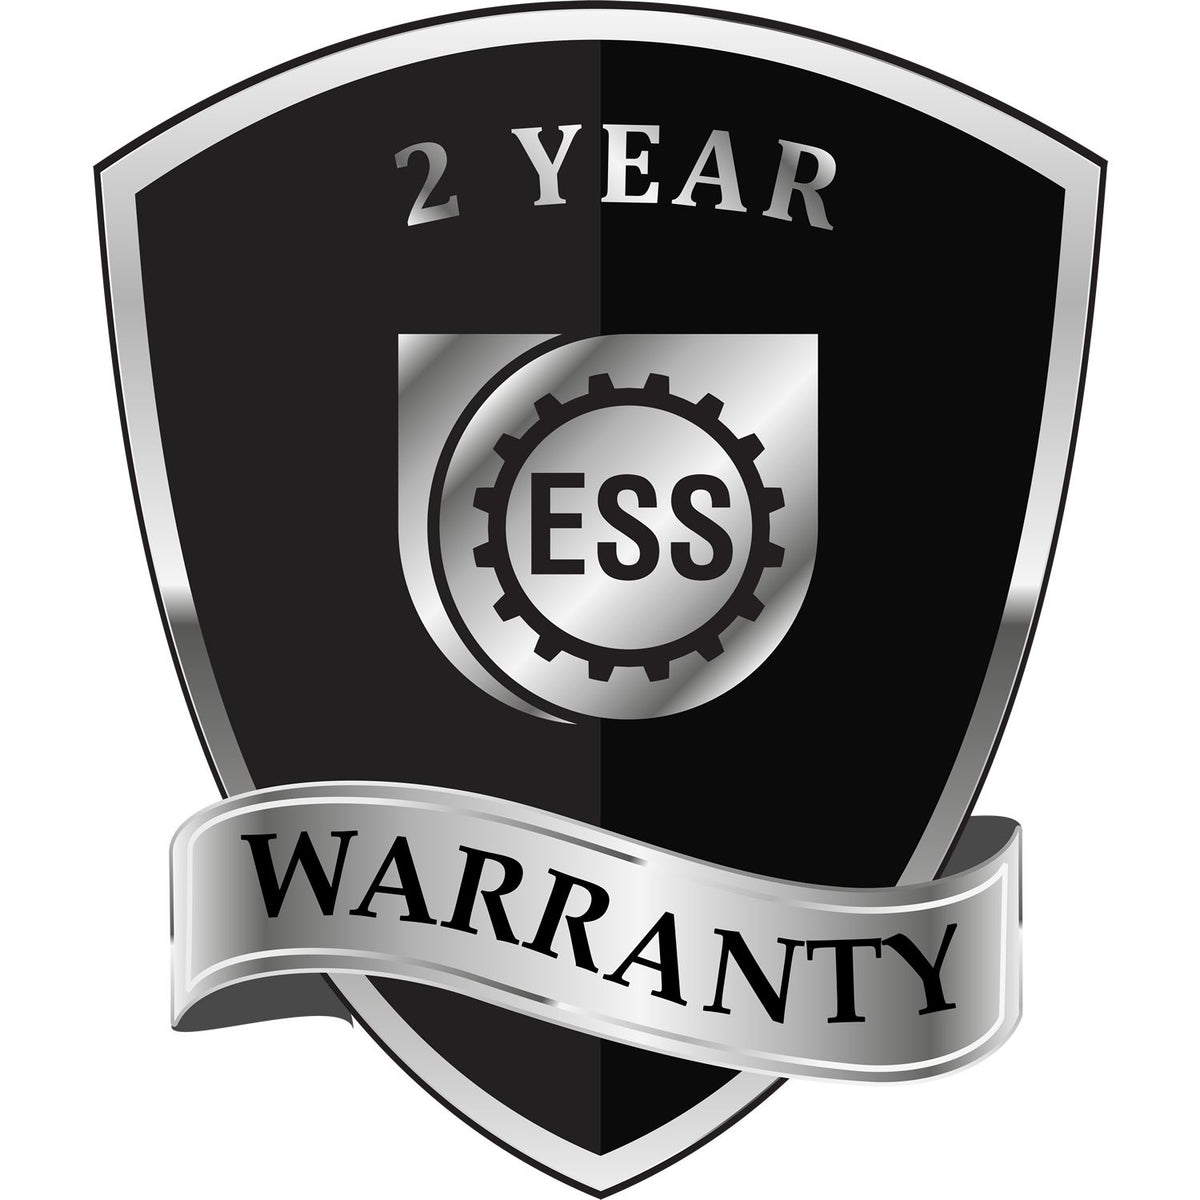 A badge or emblem showing a warranty icon for the Long Reach Idaho PE Seal